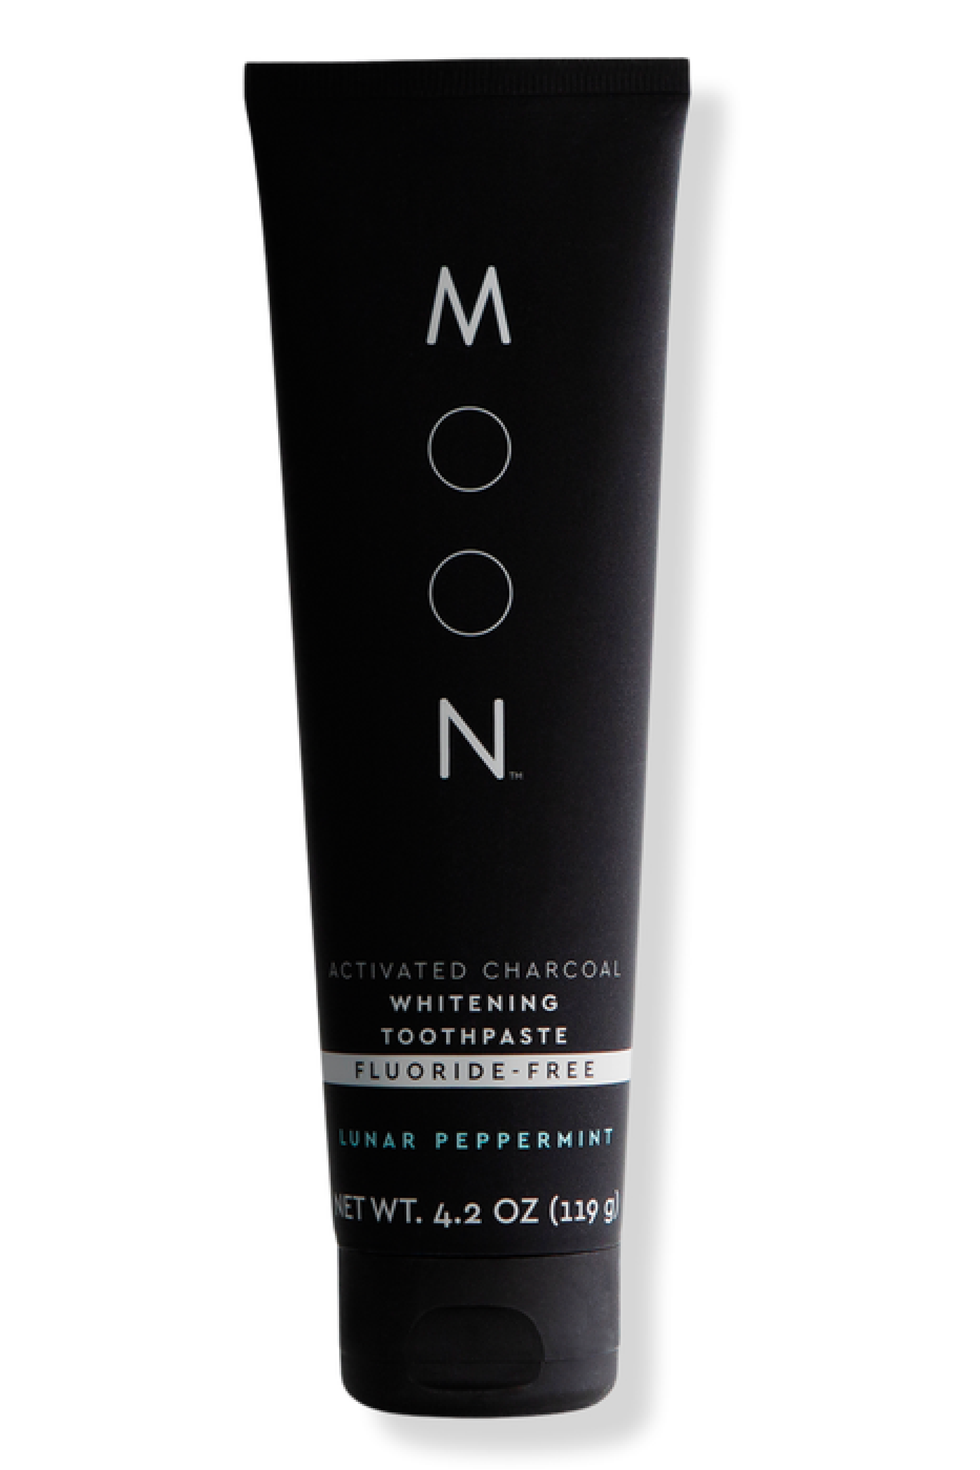 Moon Activated Charcoal Whitening Toothpaste